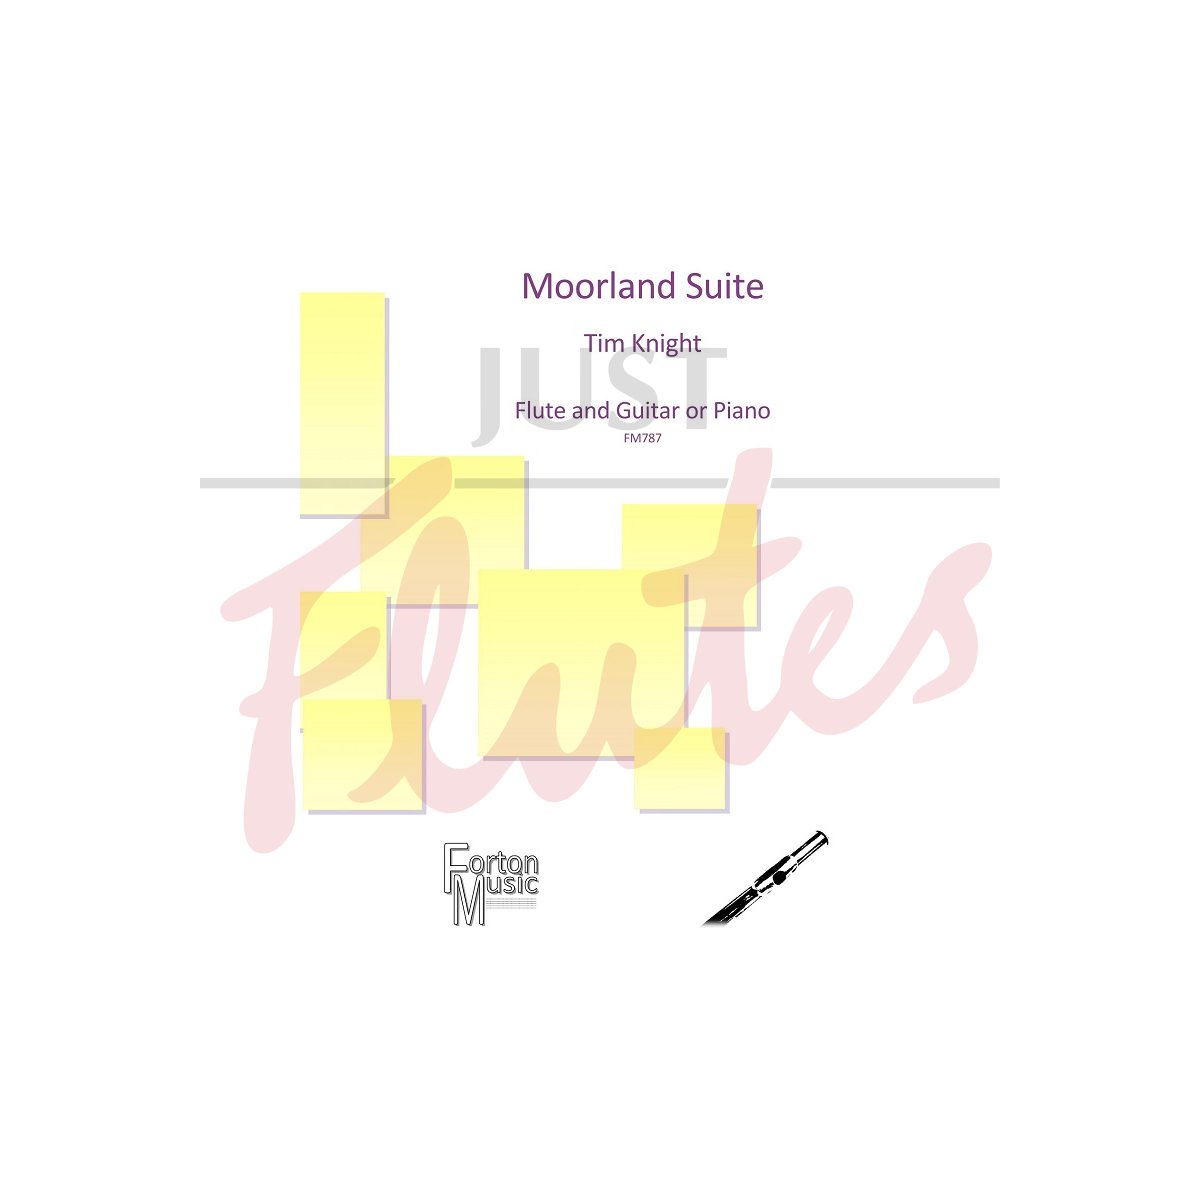 Moorland Suite for Flute and Guitar